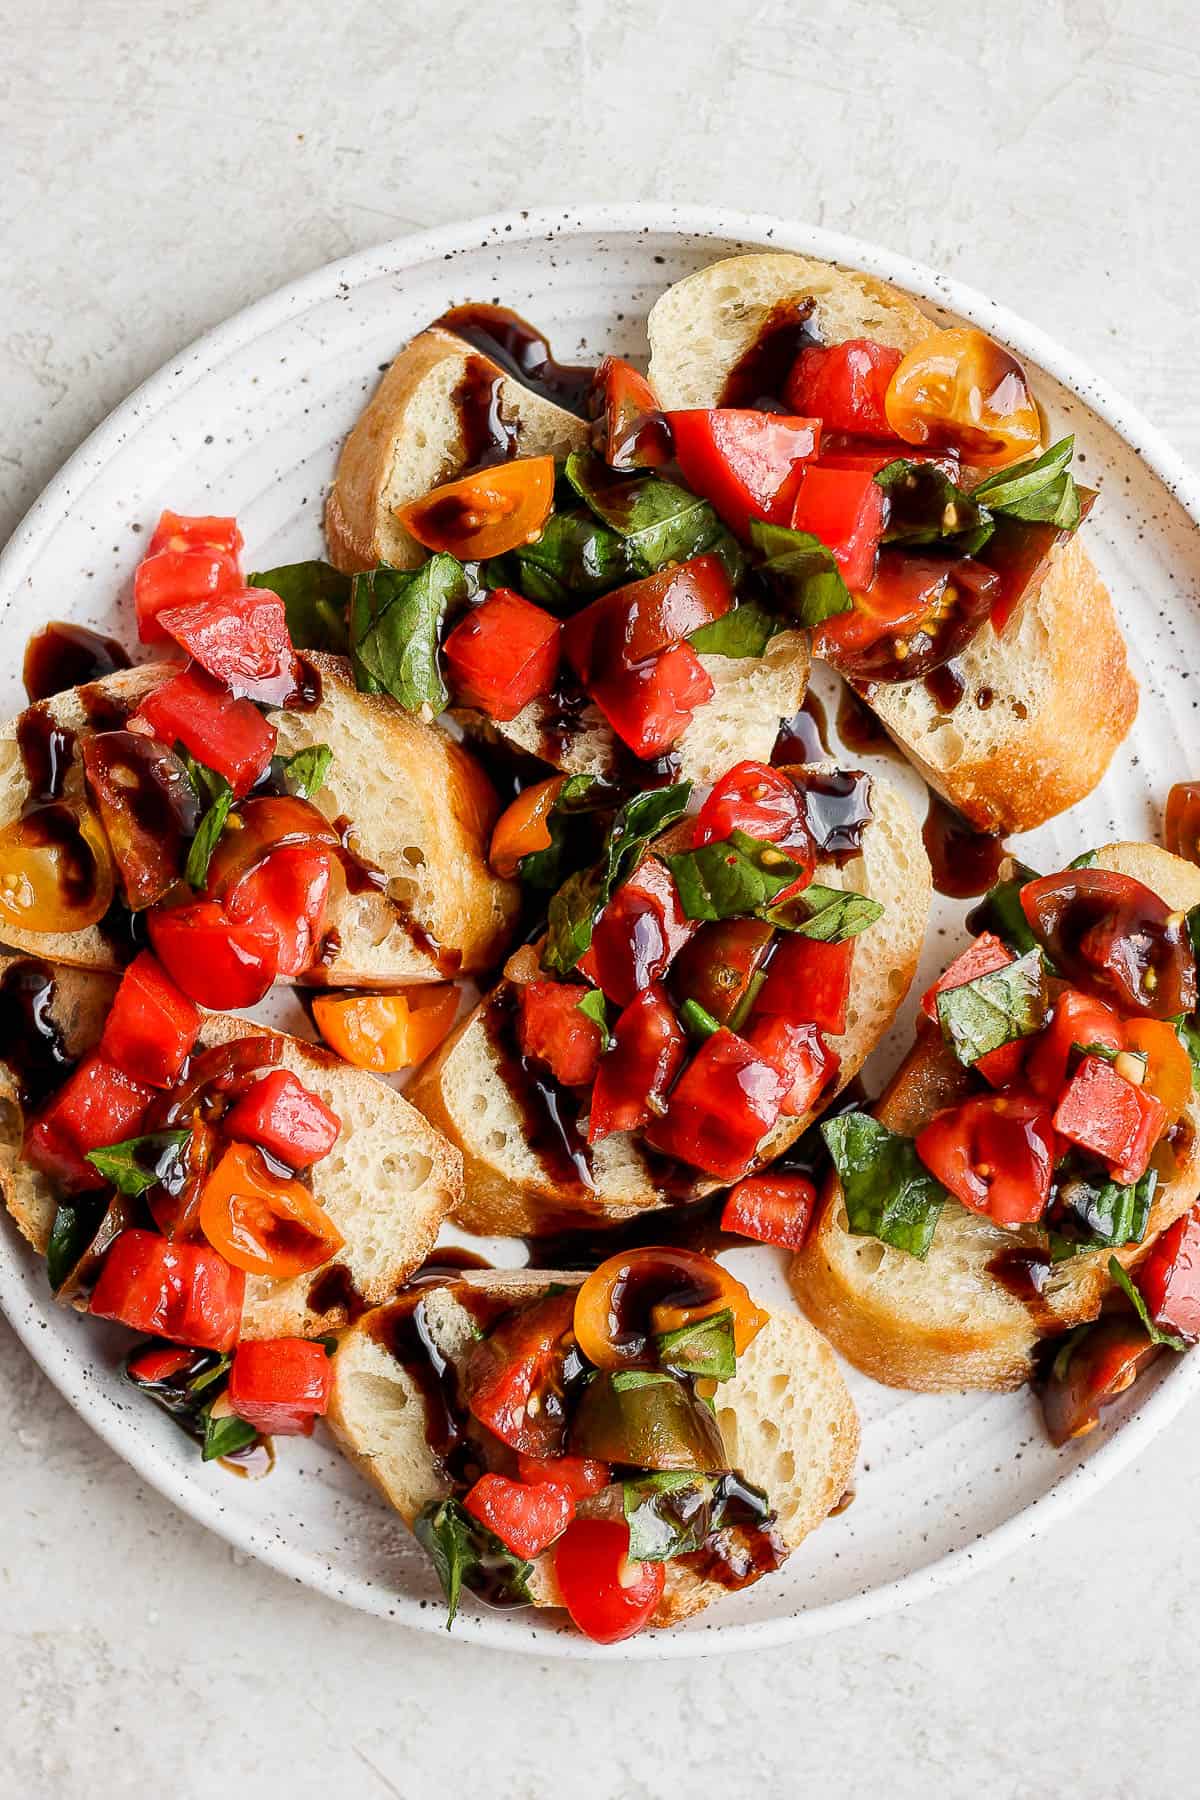 Crostini topped with fresh bruschetta on a white plate.